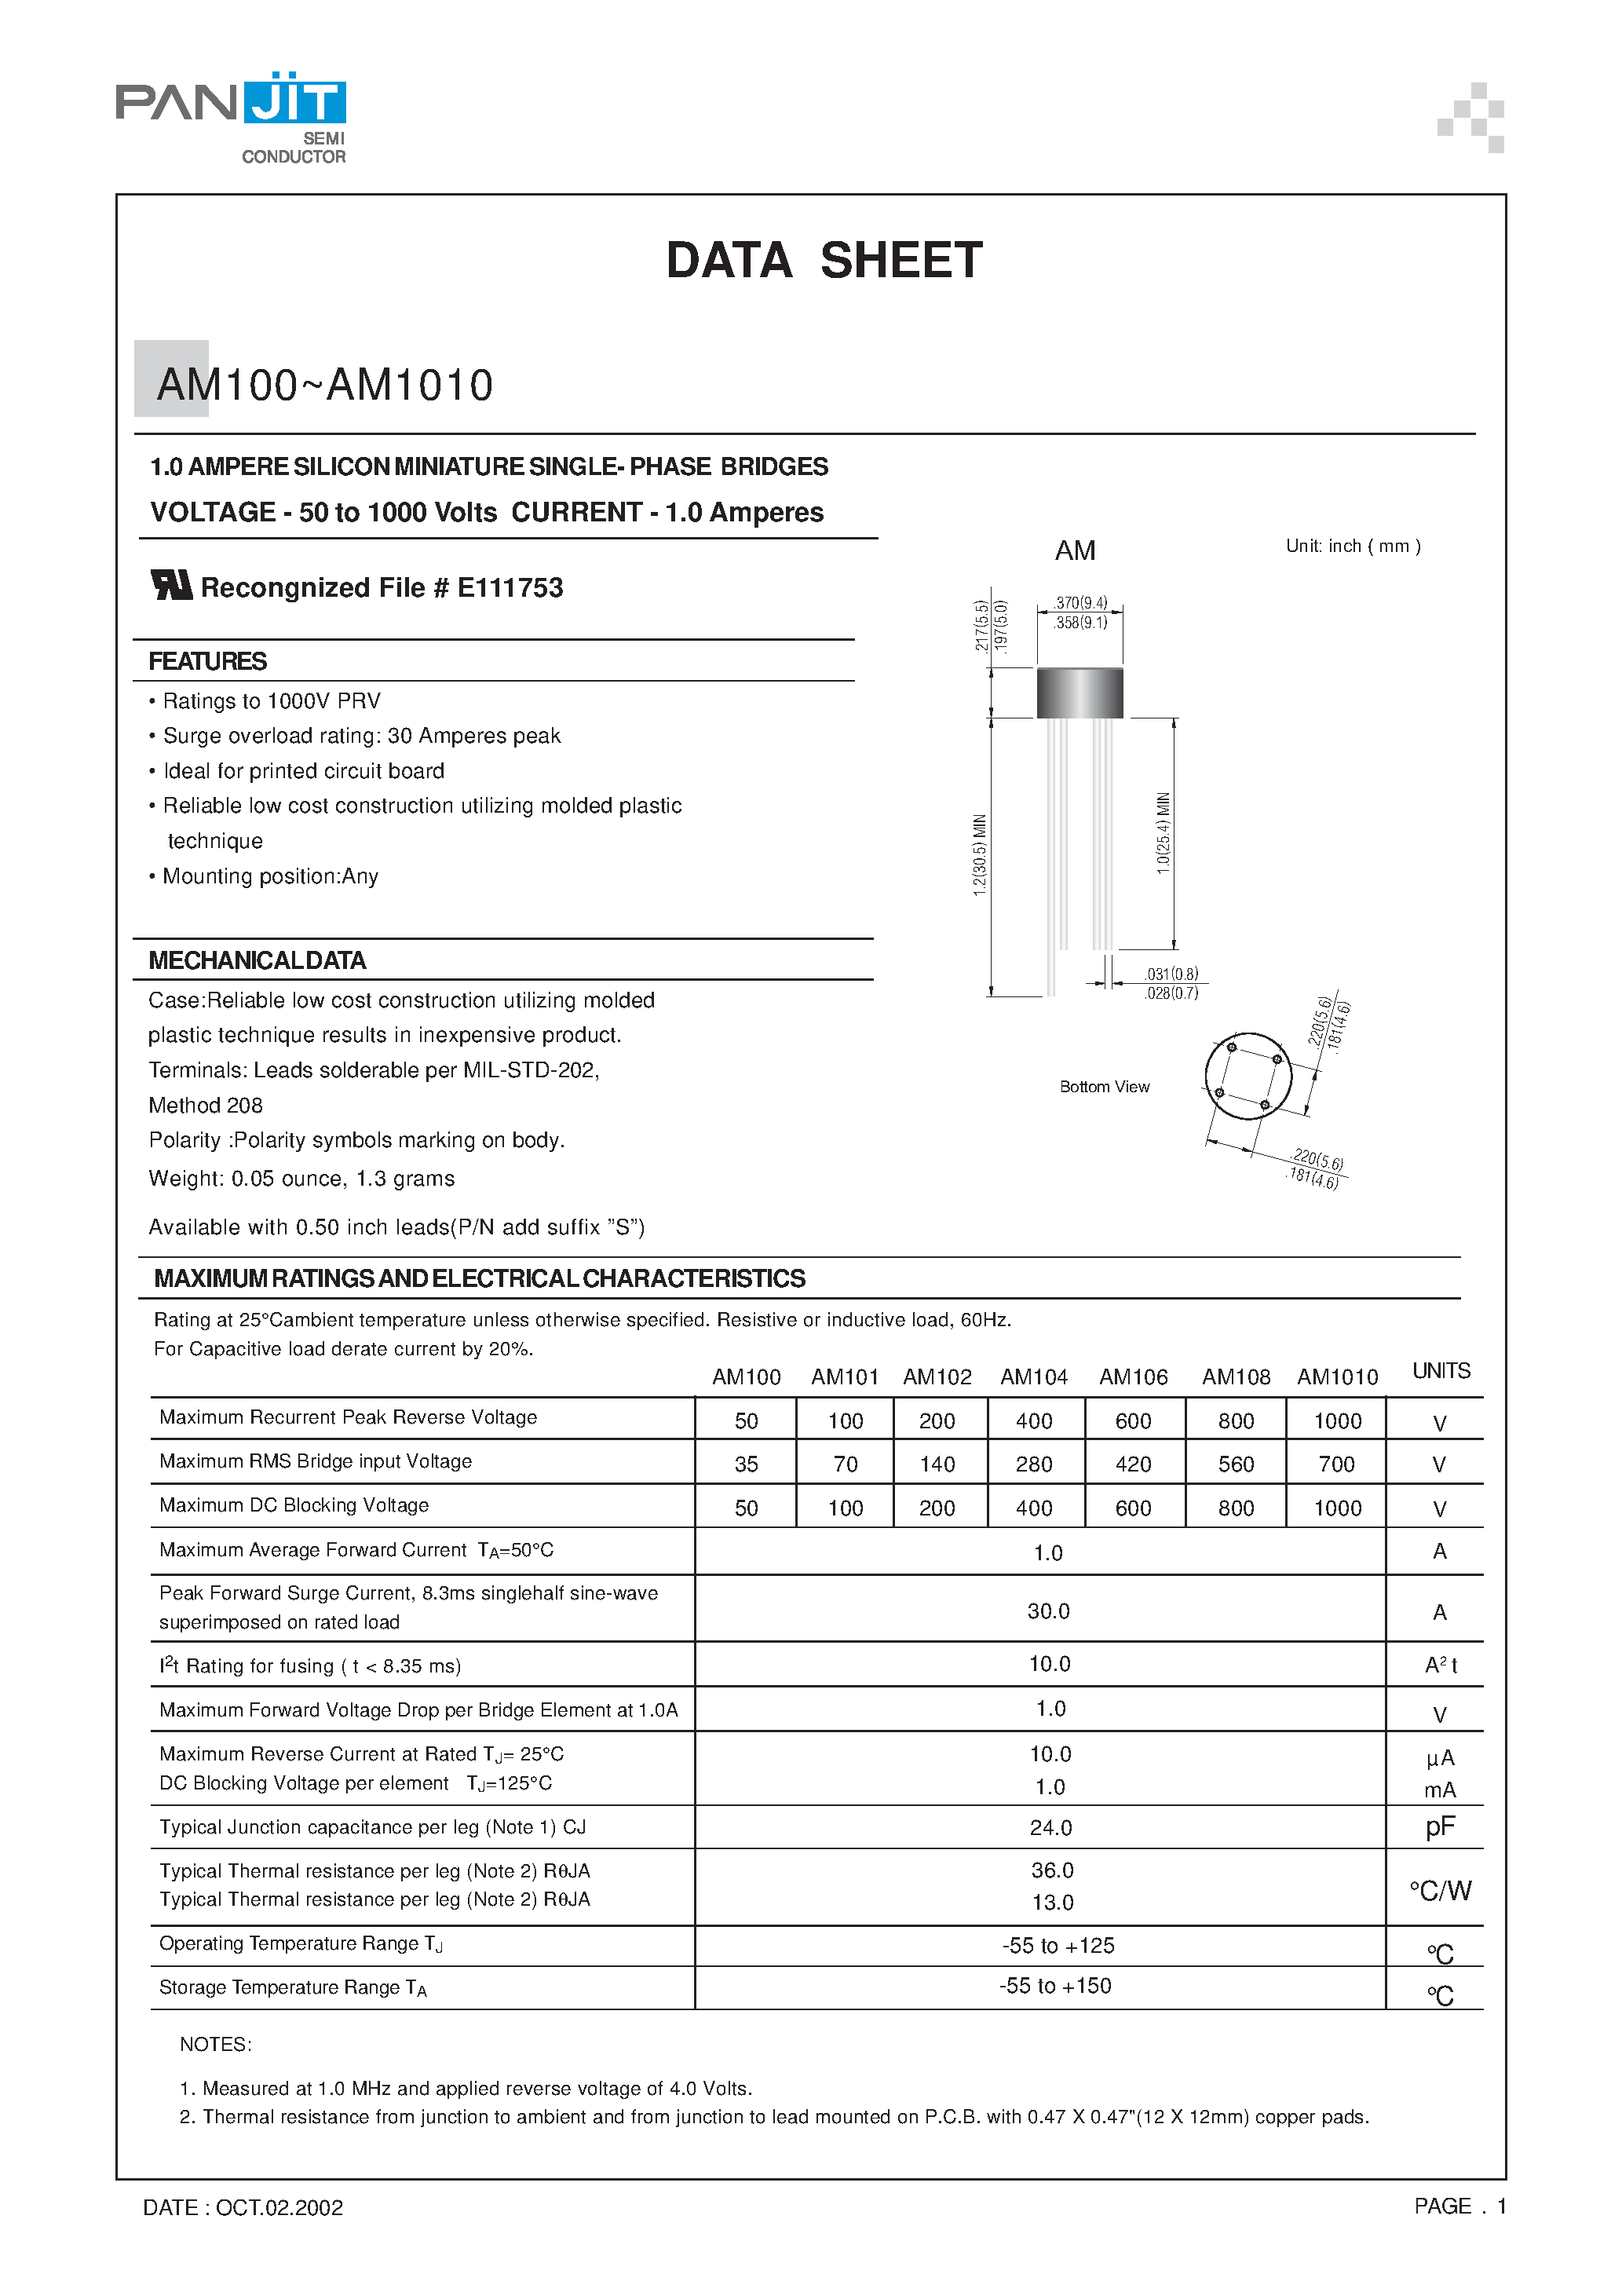 Datasheet AM106 - 1.0 AMPERE SILICON MINIATURE SINGLE- PHASE BRIDGES(VOLTAGE - 50 to 1000 Volts CURRENT - 1.0 Amperes) page 1